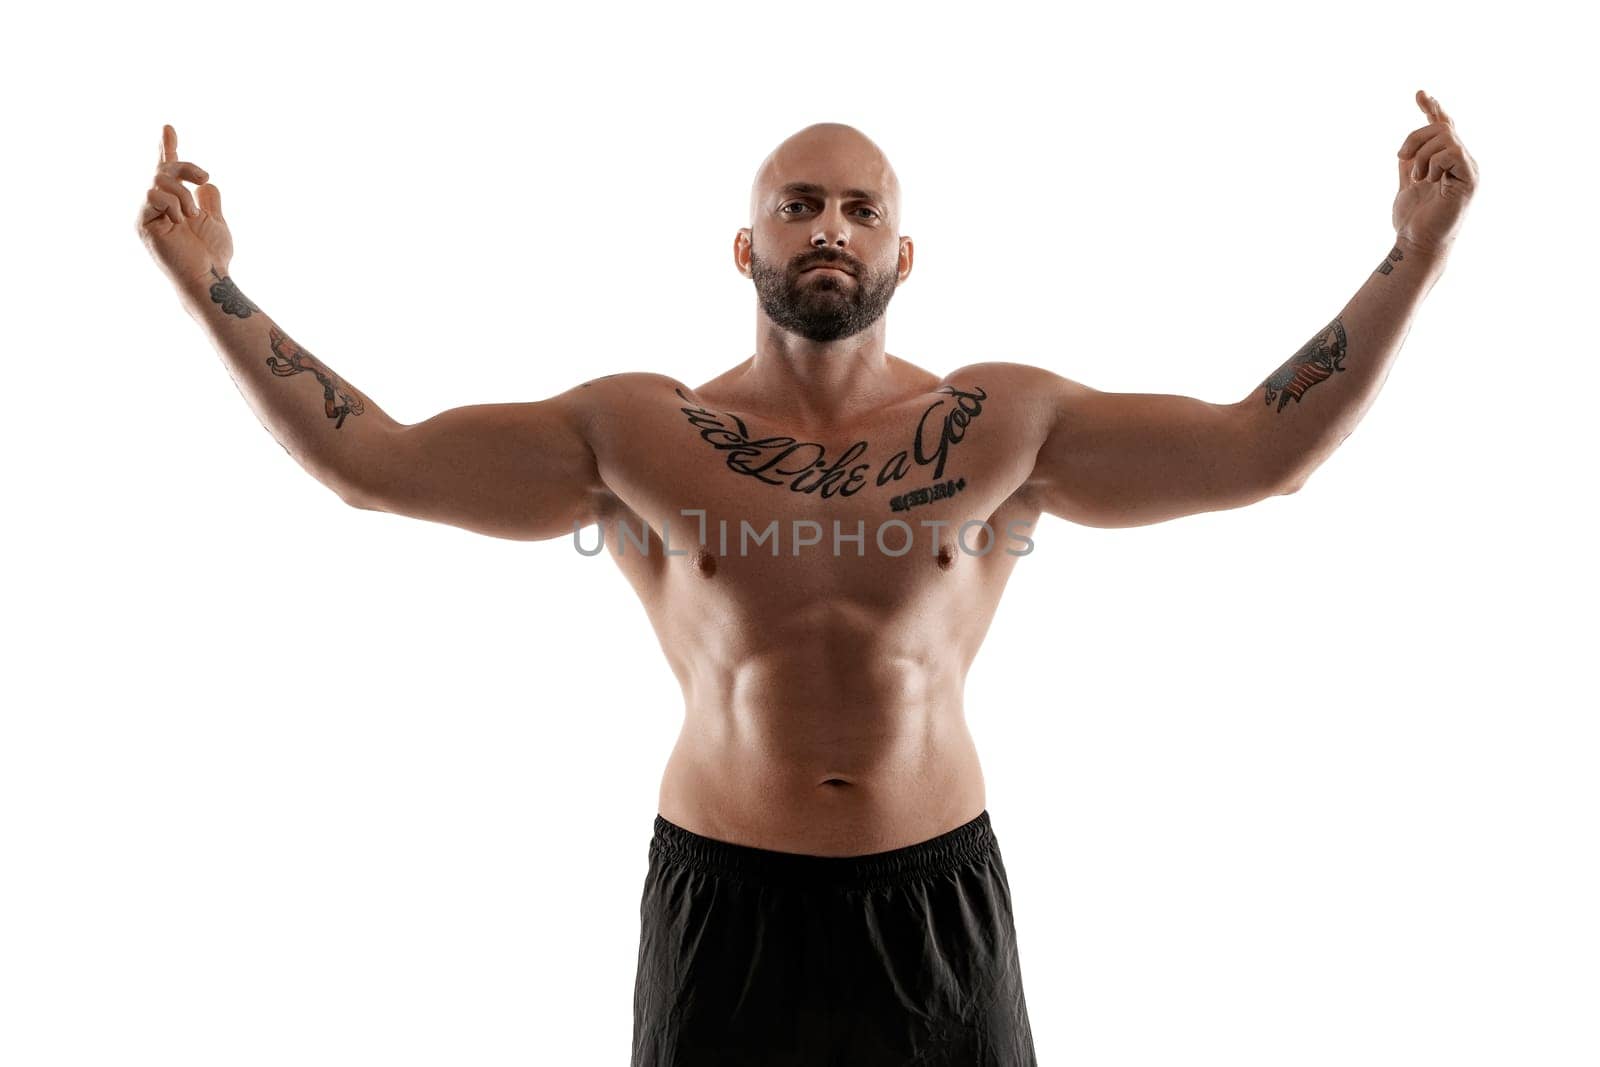 Stately bald, bearded, tattooed fellow in black shorts is posing isolated on white background, raised his hands and showing muscles, looking at the camera. Chic muscular body, fitness, gym, healthy lifestyle concept. Close-up portrait.